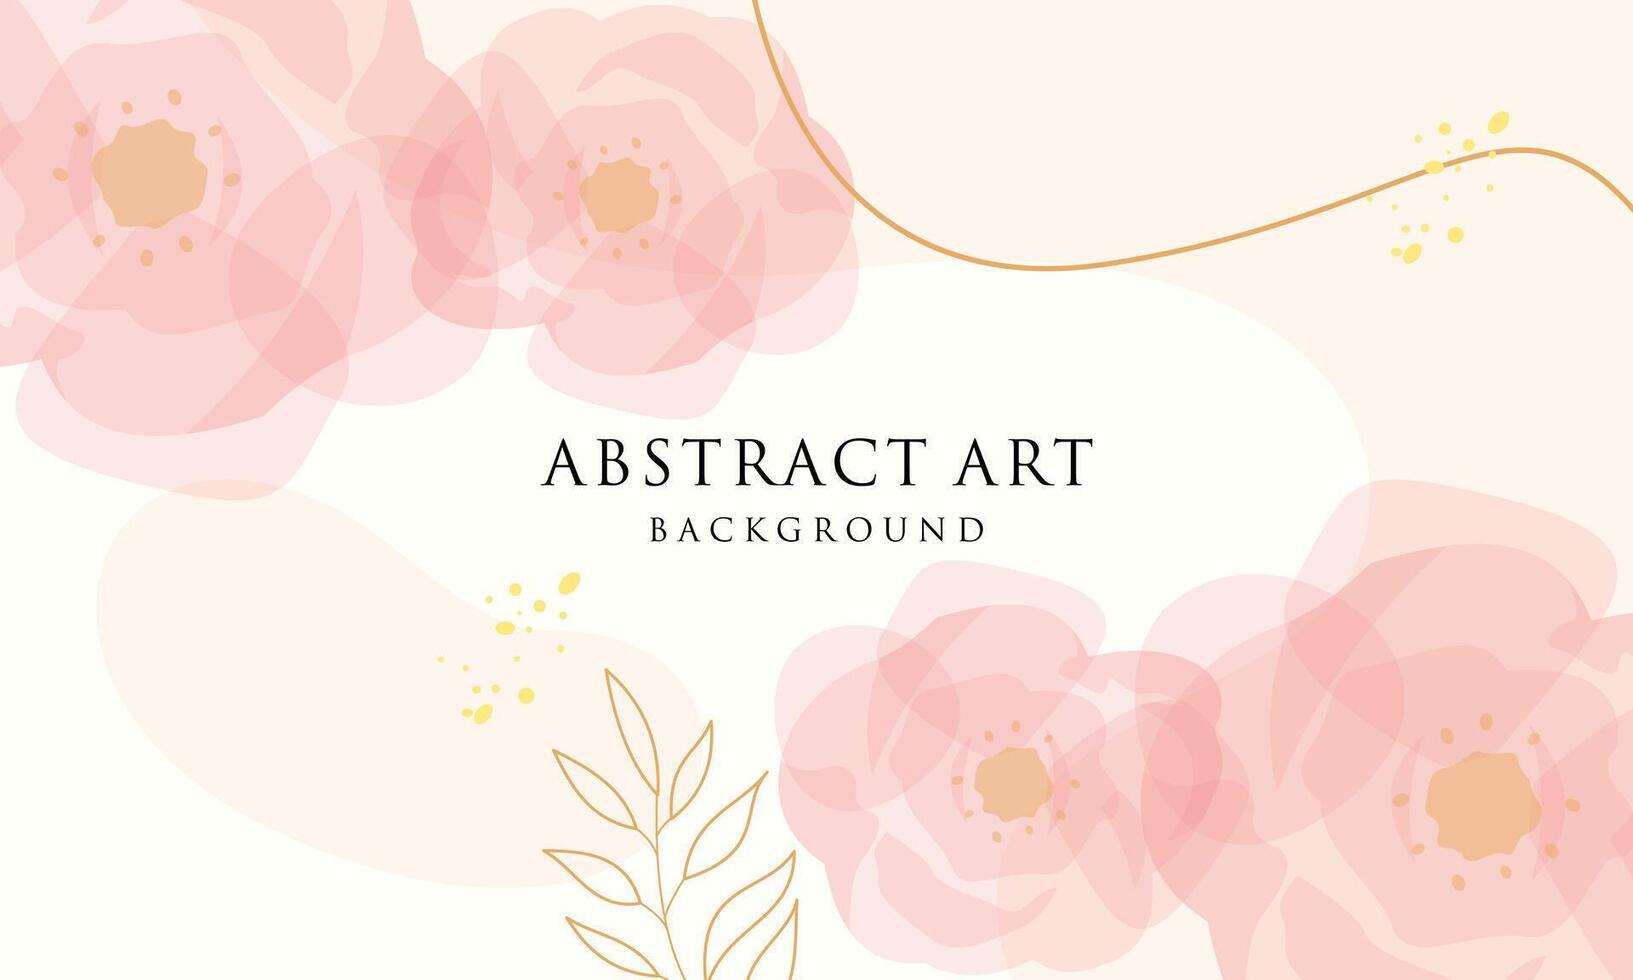 Abstract art background . Line art flower and botanical leaves vector